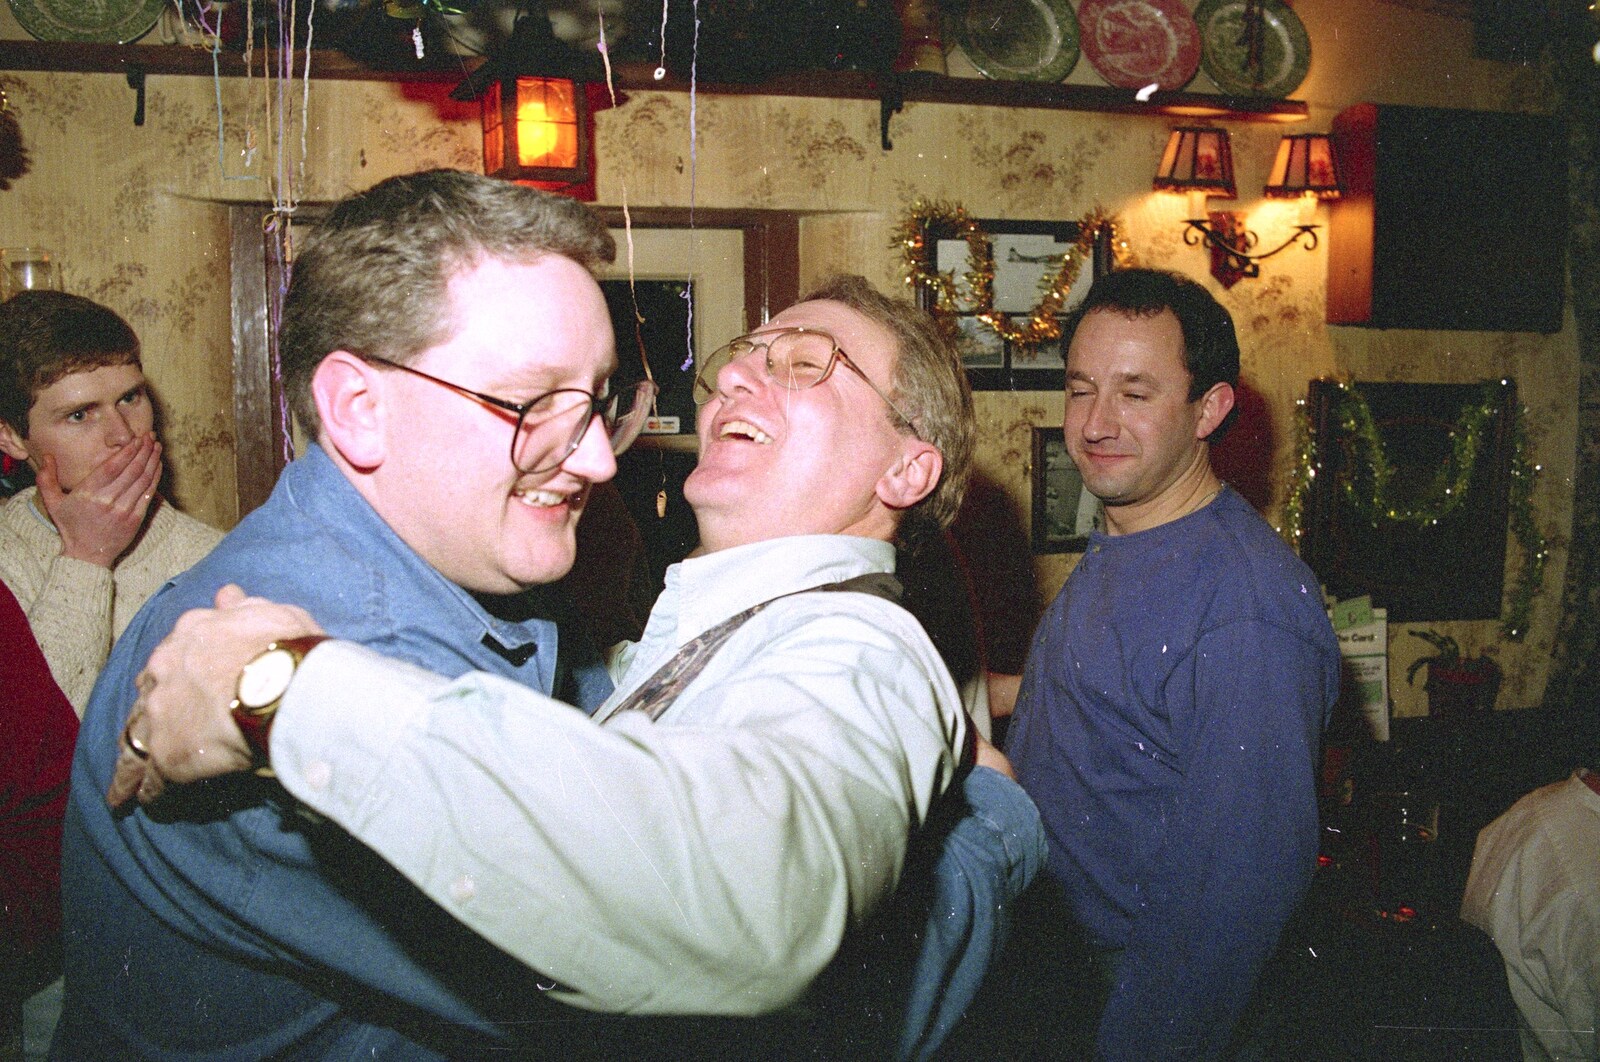 Graham gives John Willy a hug from New Year's Eve in the Swan Inn, Brome, Suffolk - 31st December 1995